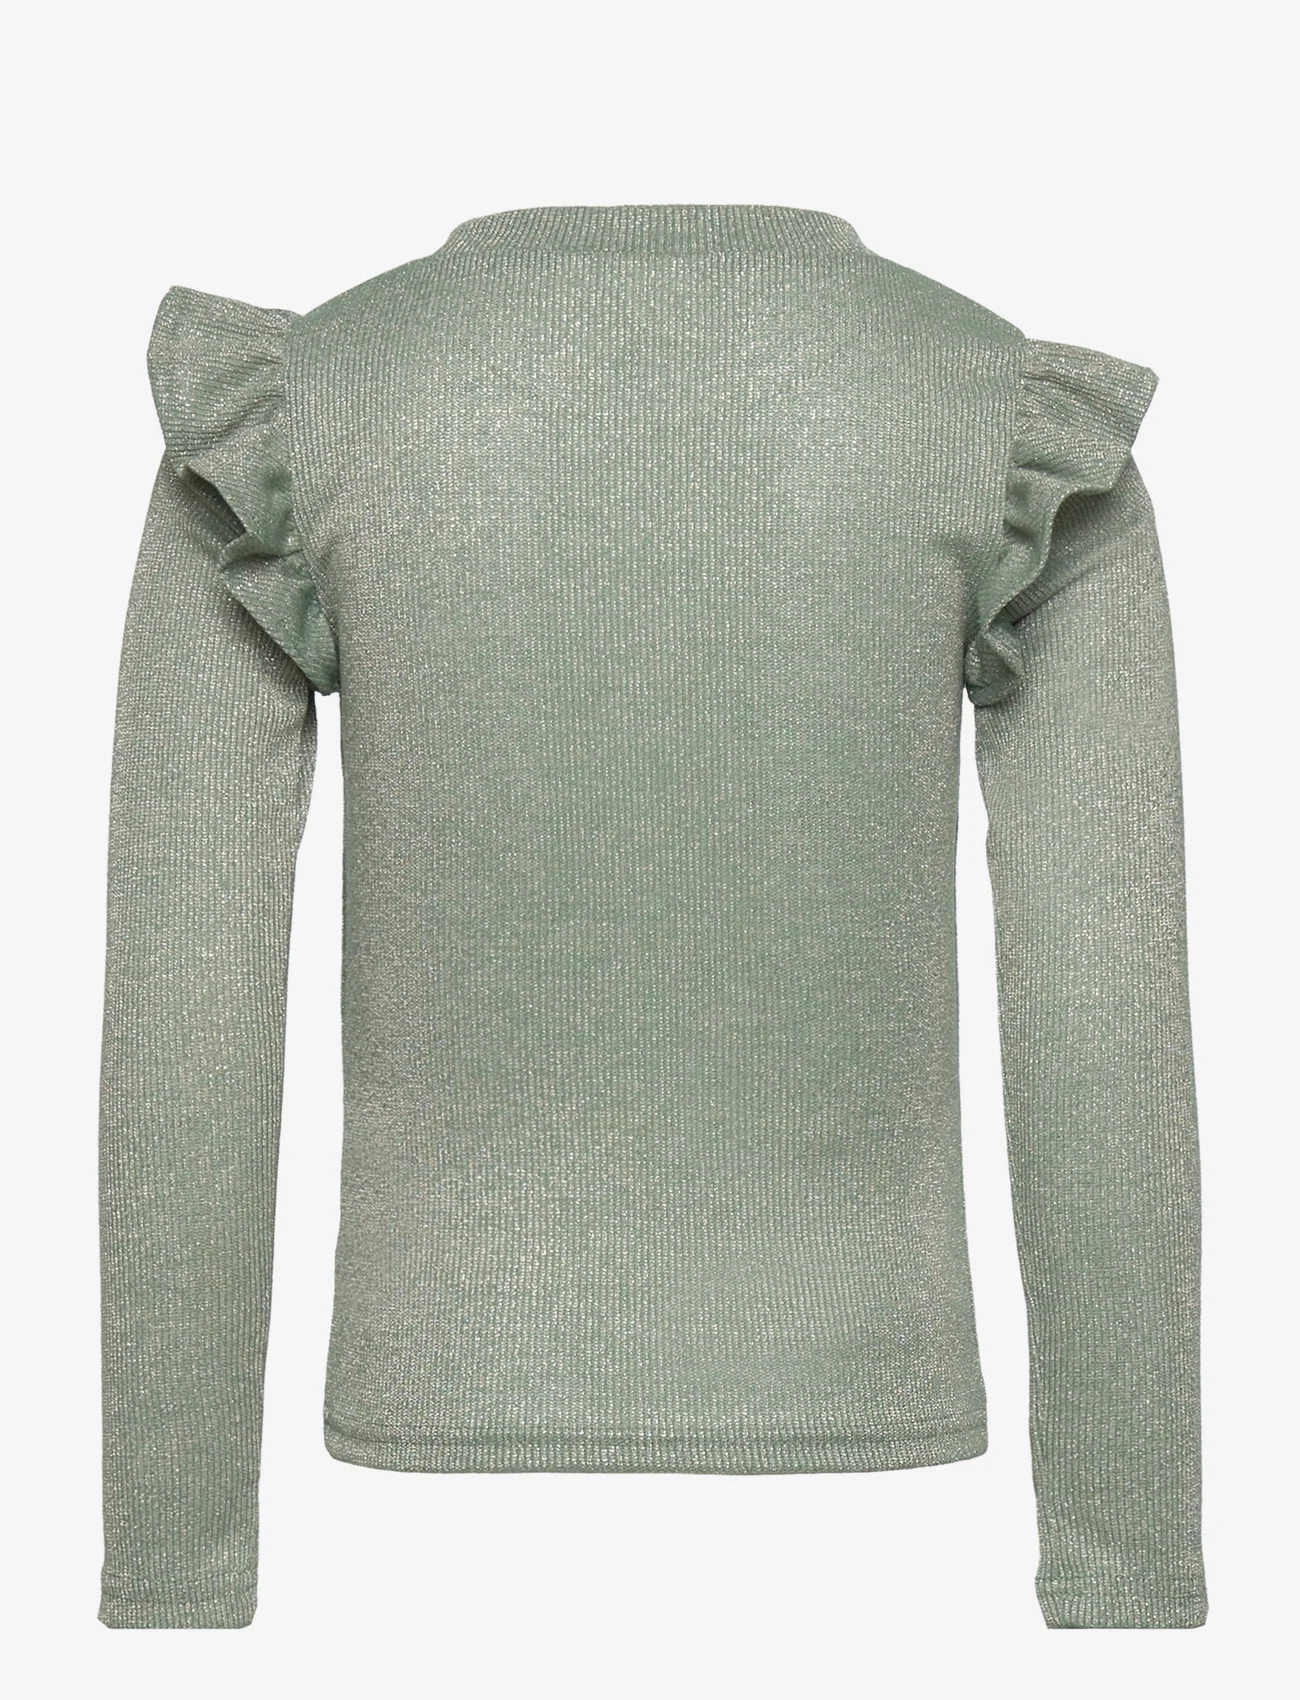 The New - TNFARAH L_S TEE - long-sleeved t-shirts - seagrass - 1